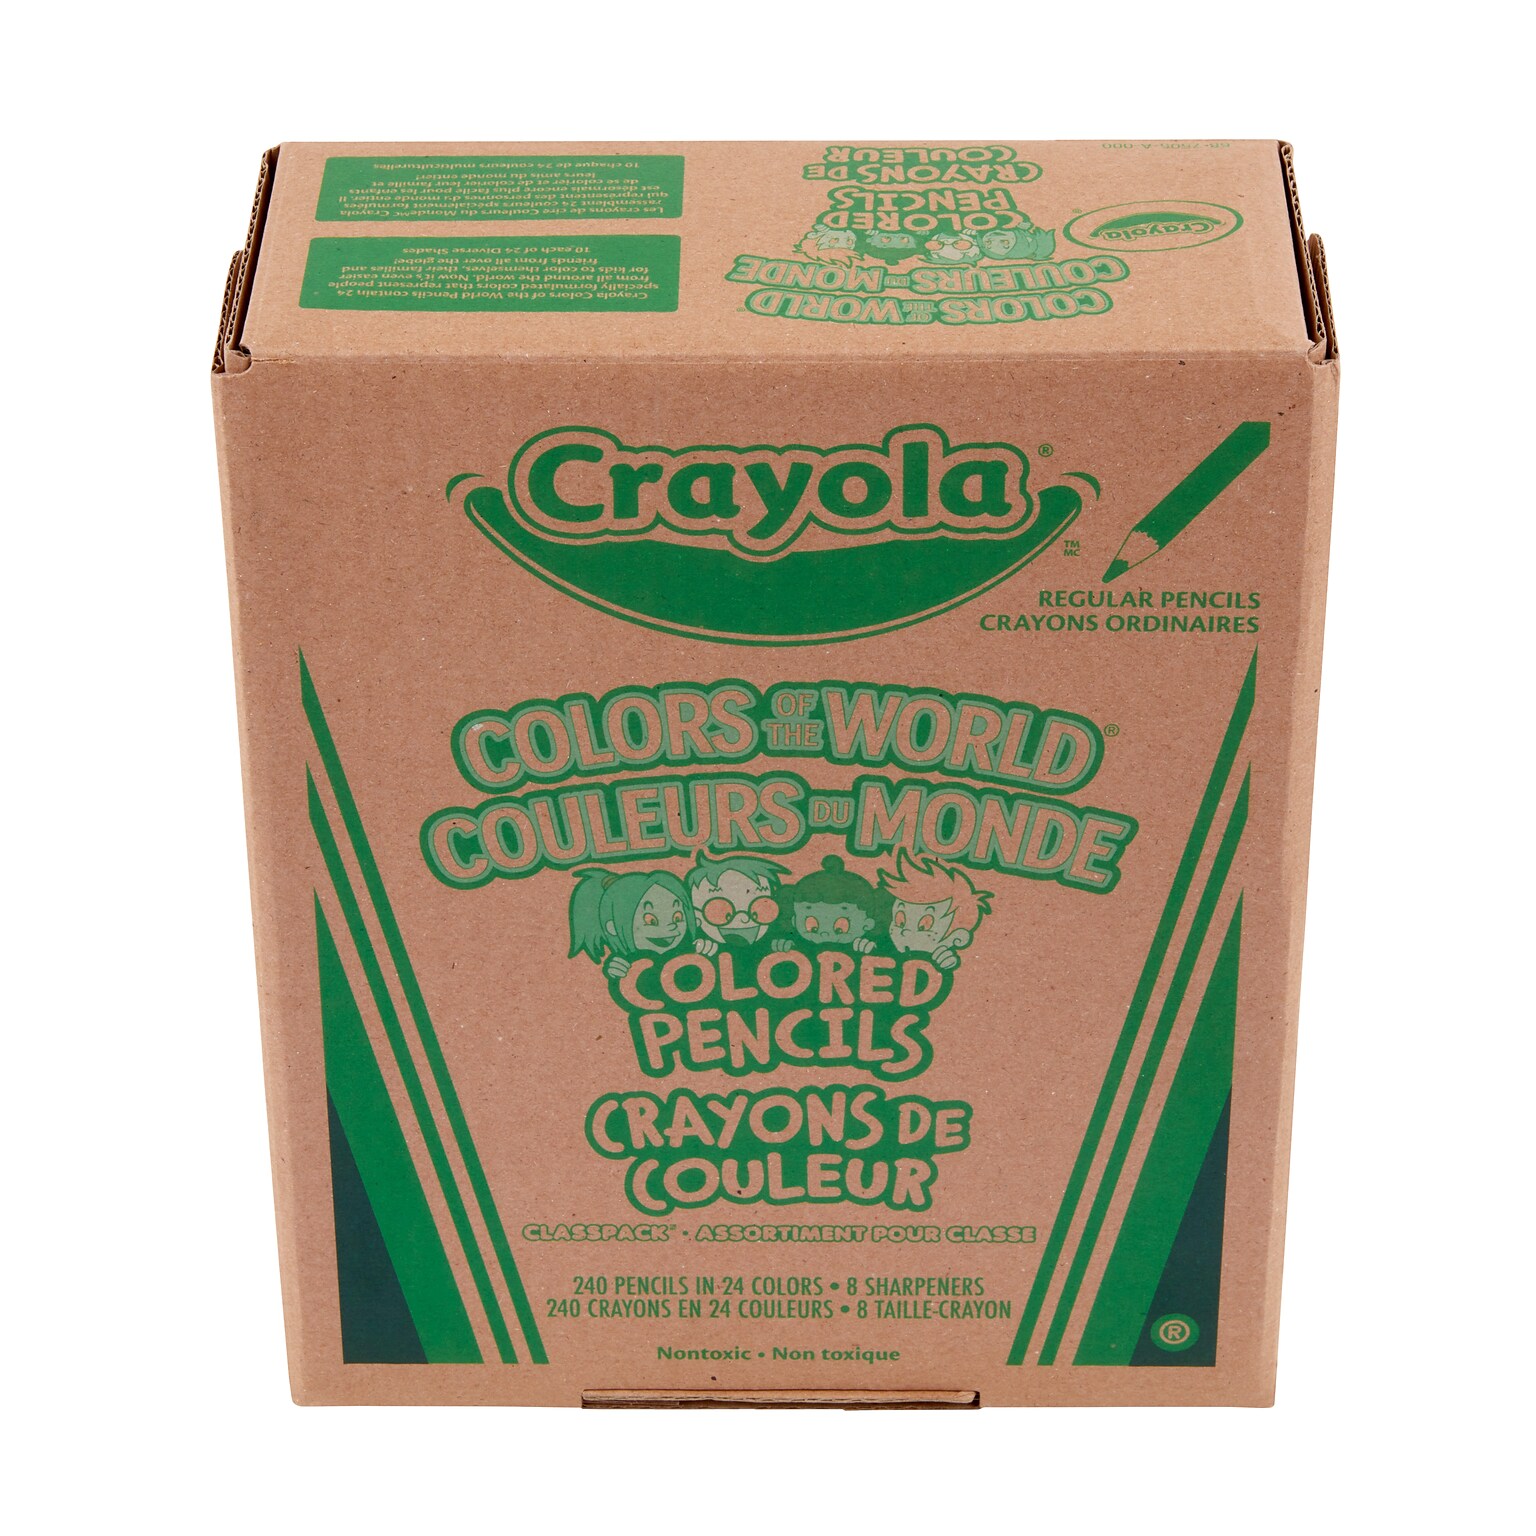 Crayola Colors of the World Kids Colored Pencils, Assorted Colors, 24 Pencils/Pack, 10 Packs/Box (682023)